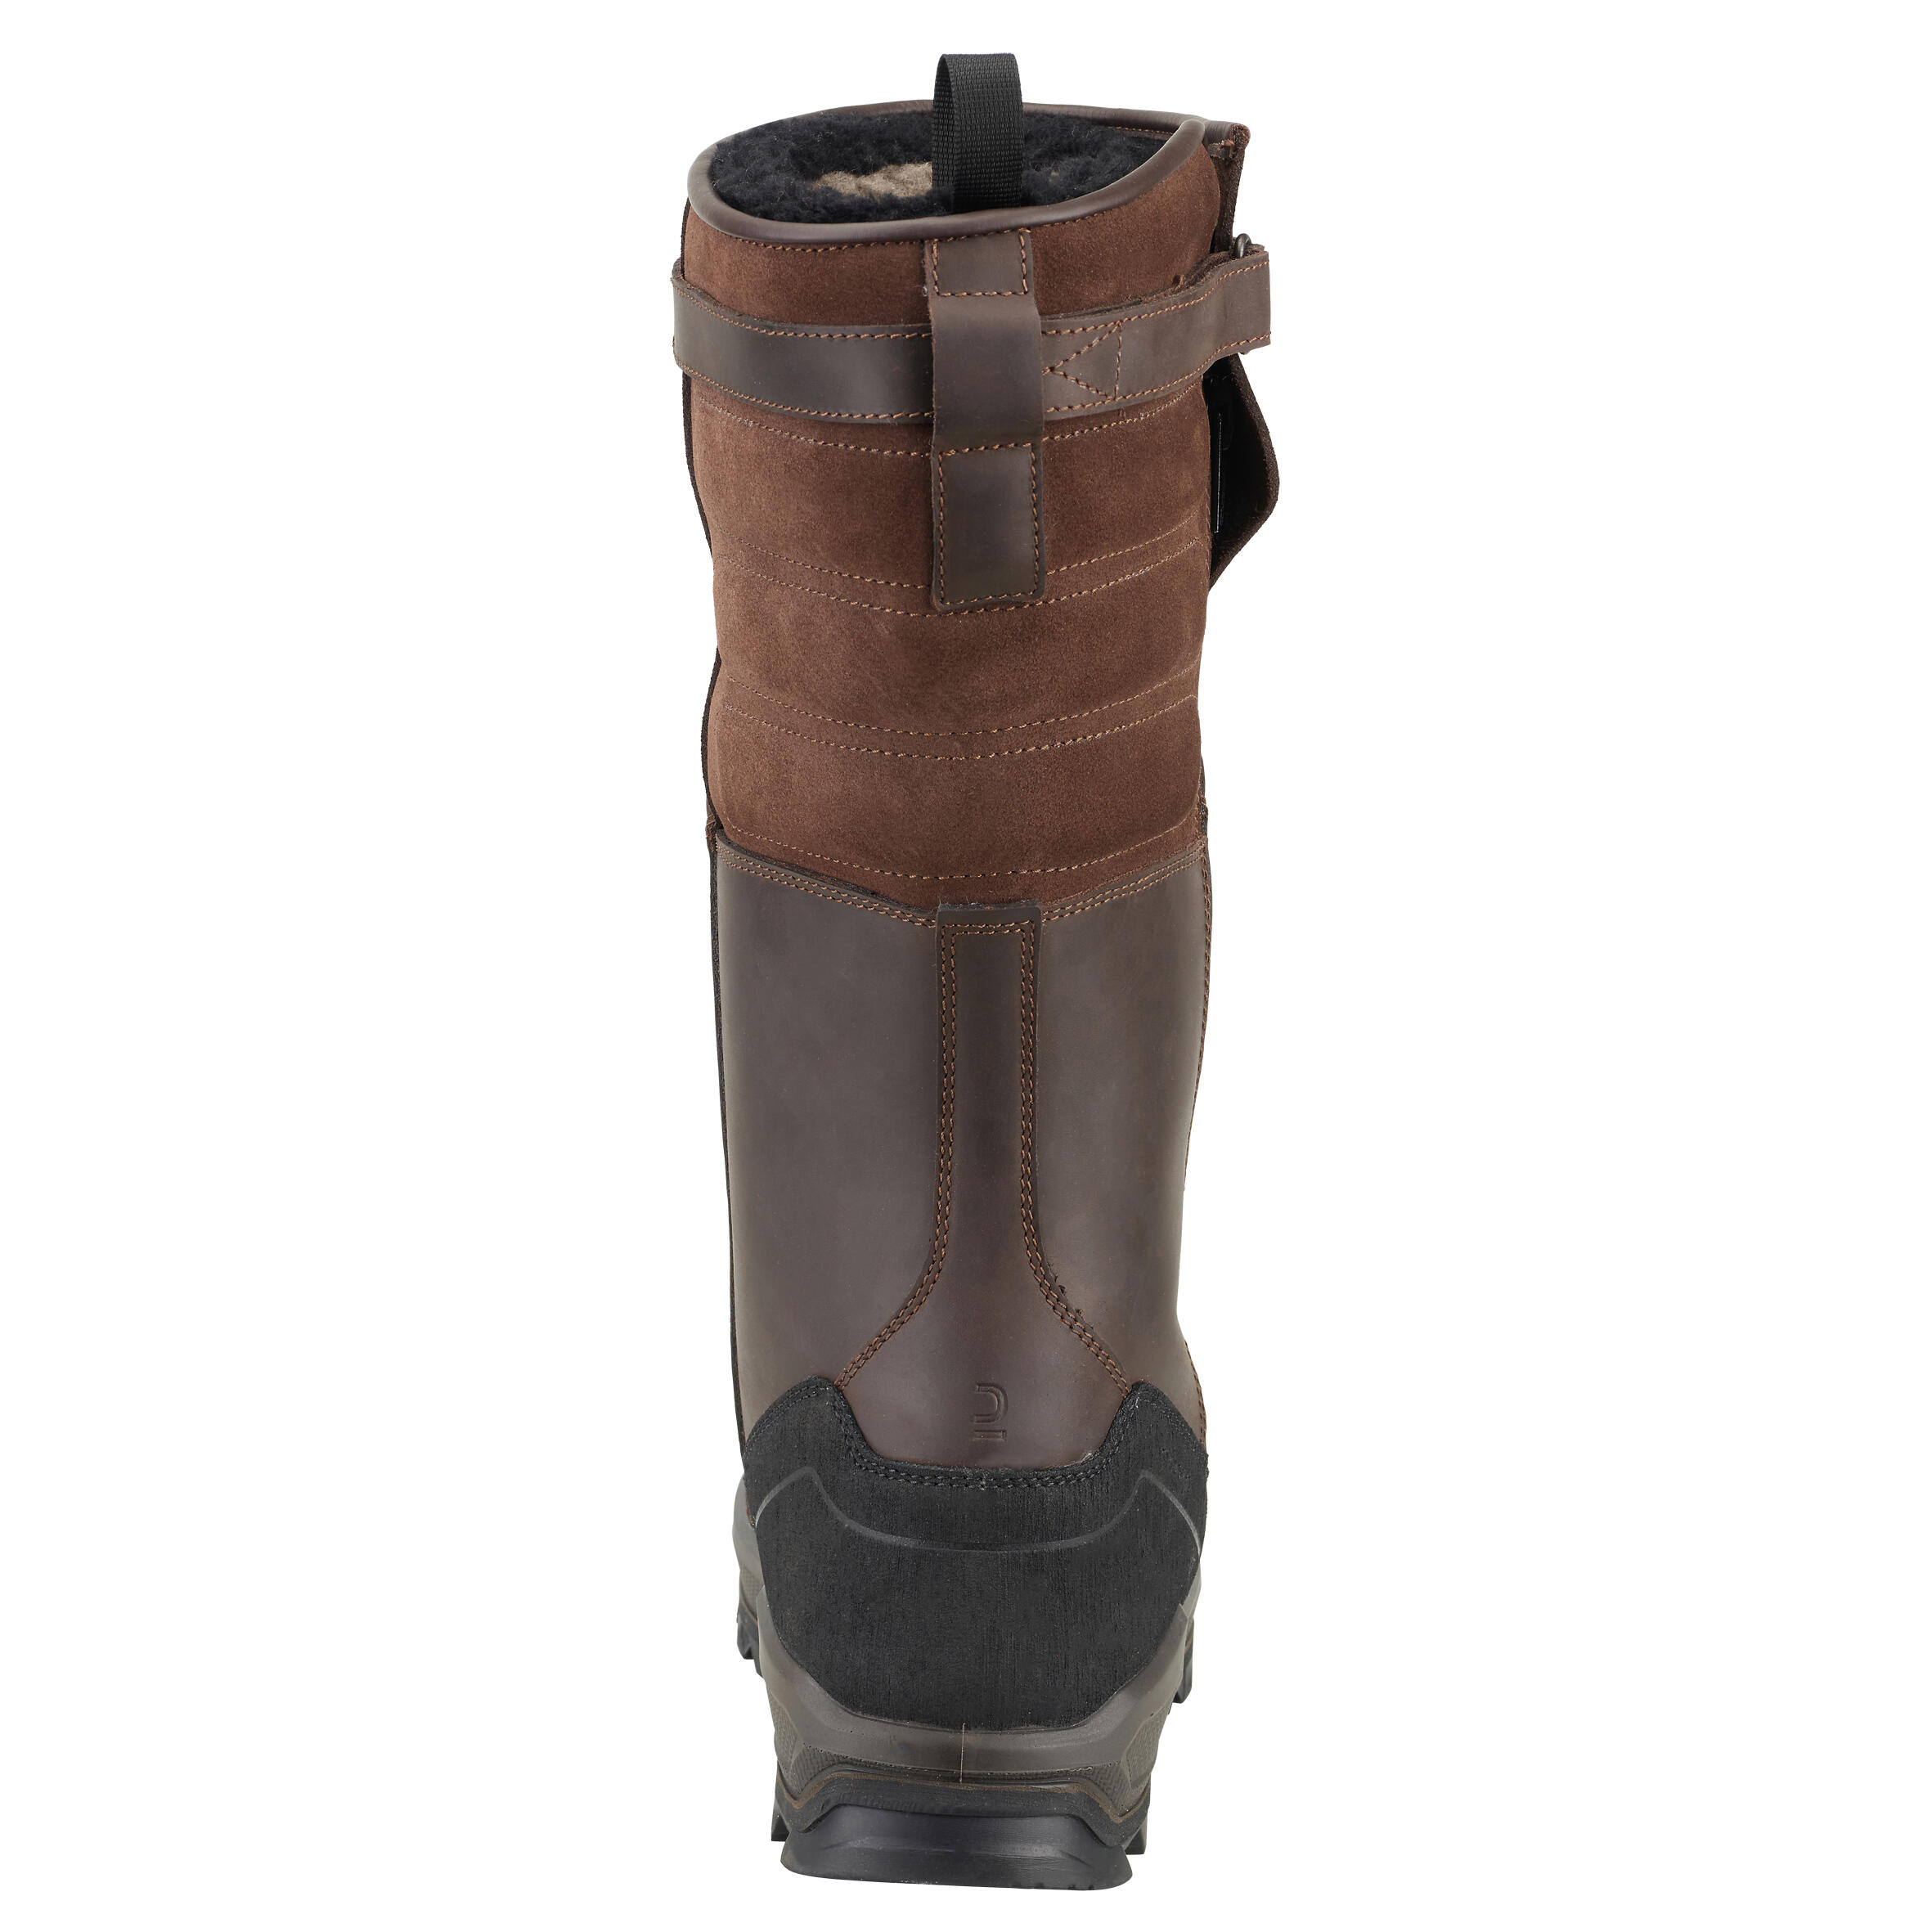 Warm and waterproof leather boots 900. 4/6